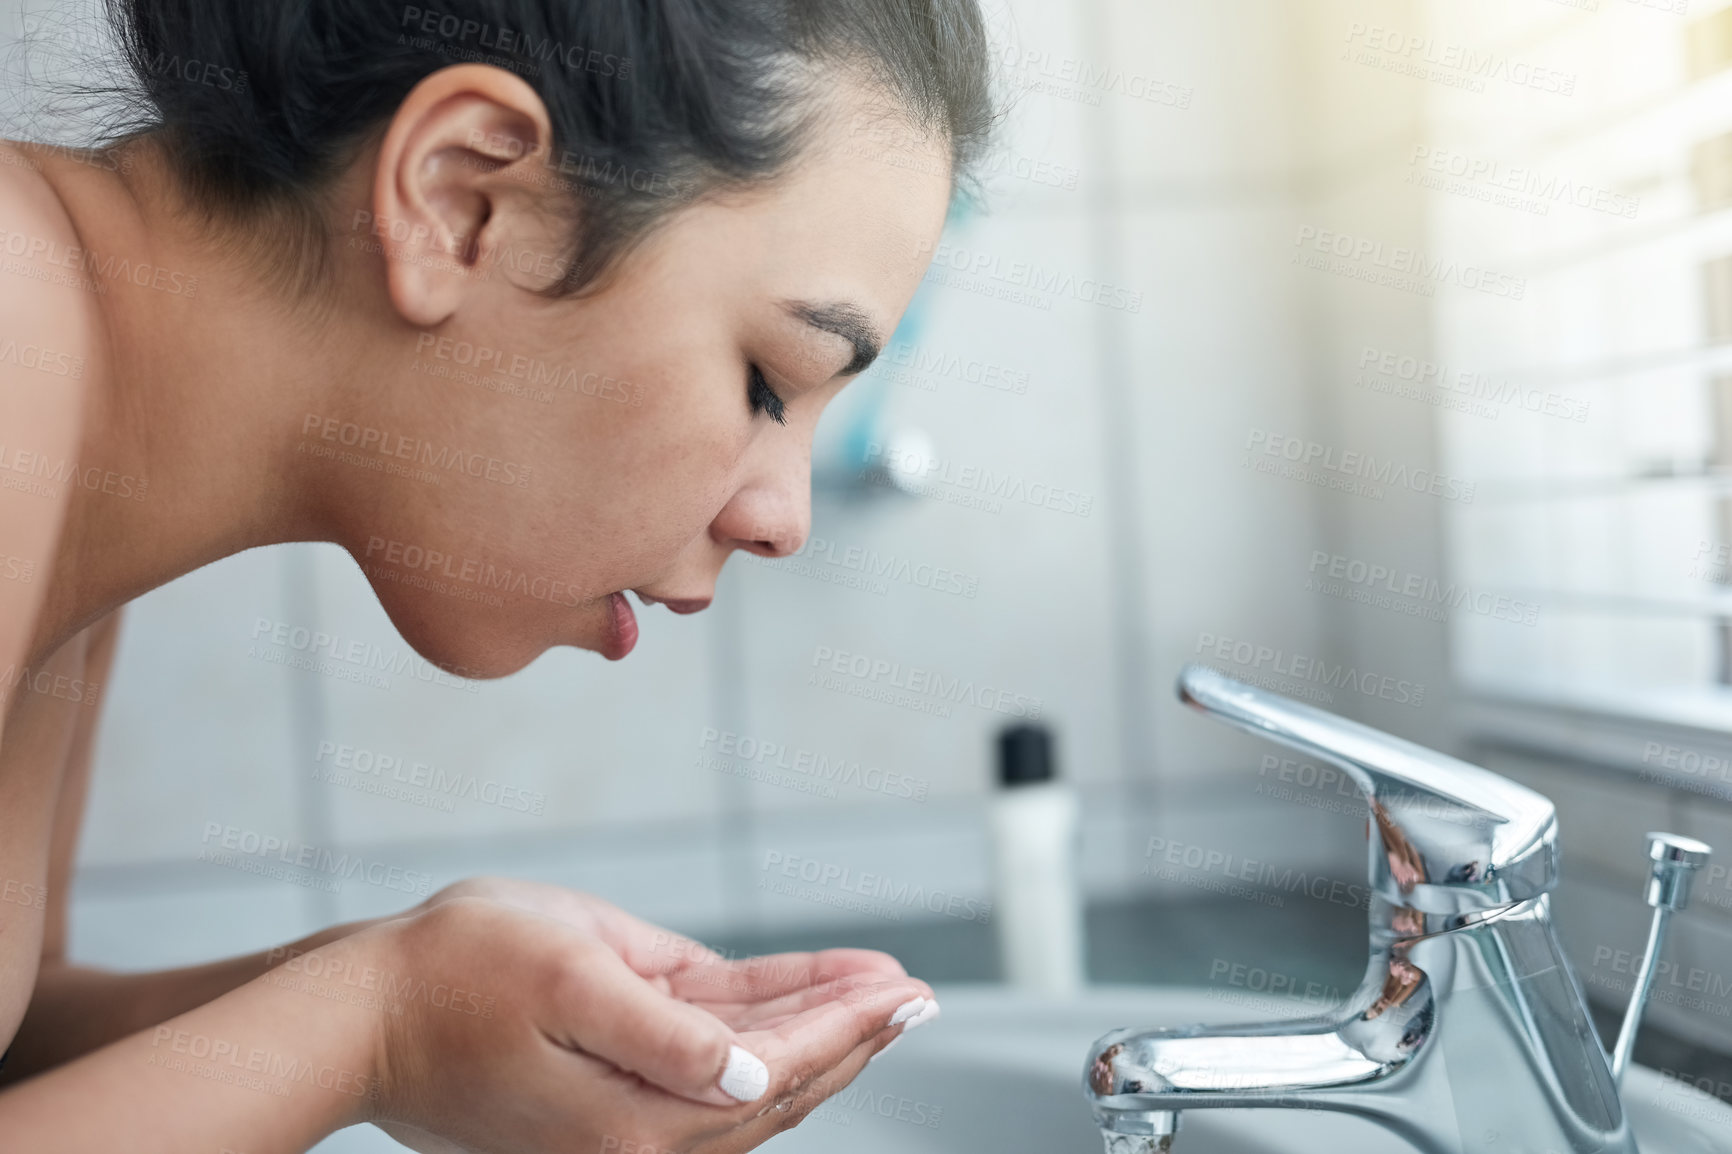 Buy stock photo Hands, washing face and woman in bathroom for facial cleanse, healthcare and morning routine. Asian person, hygiene and sink with cleaning for skincare, natural self care and wellness at home